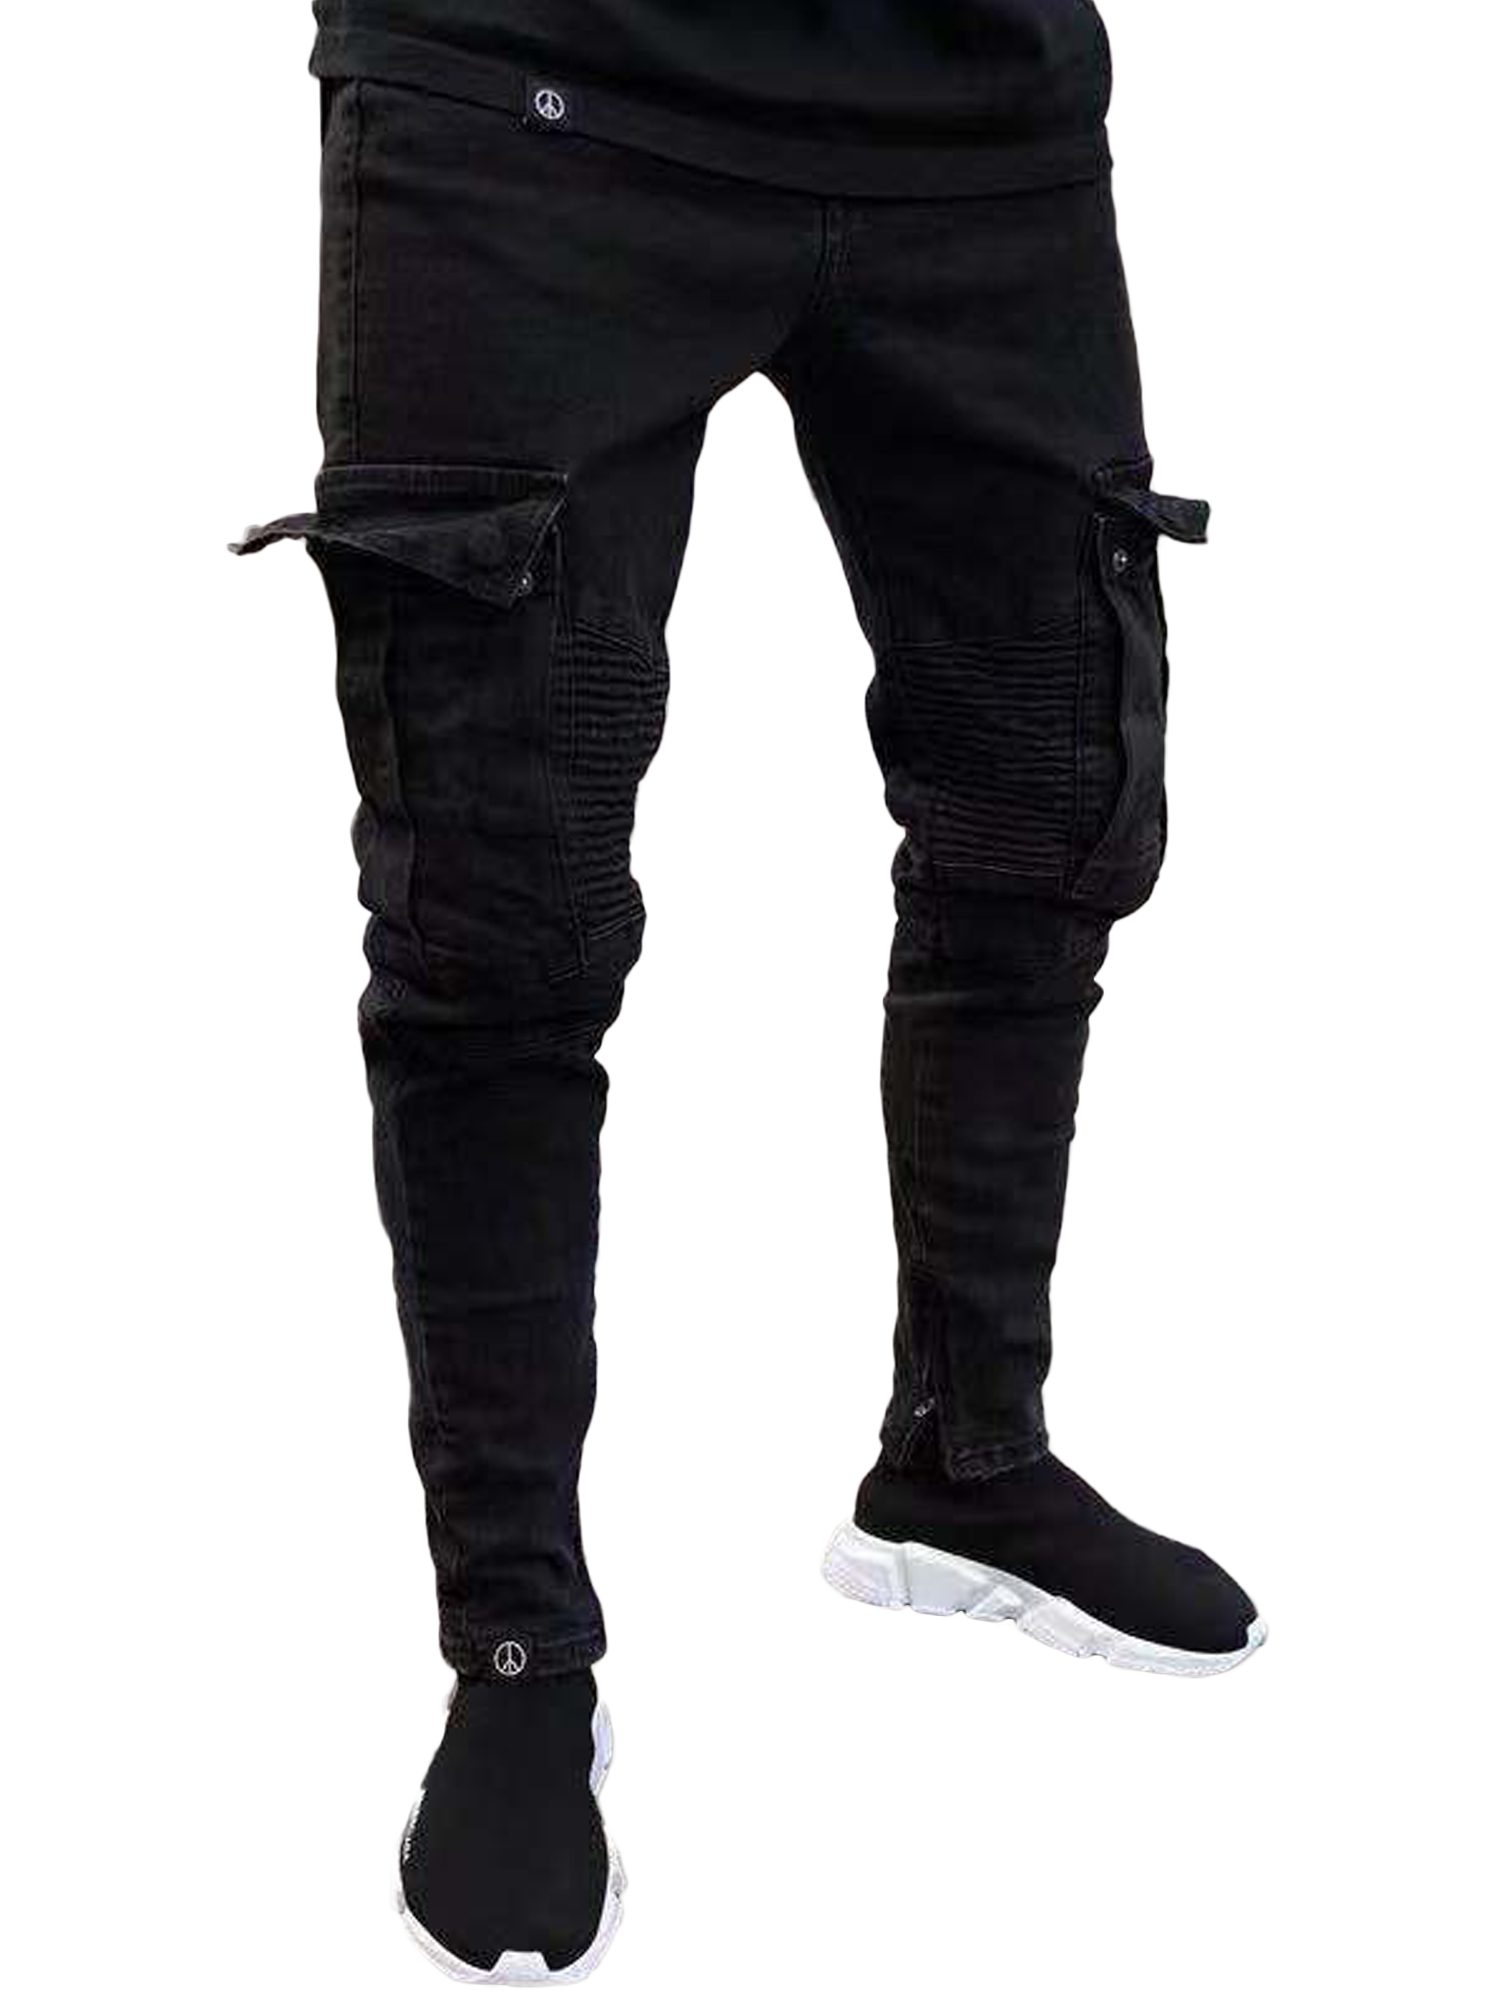 Spring hue Mens Slim Fit Urban Straight Leg Trousers Casual Pencil Jogger Cargo Pants Jeans - image 1 of 5